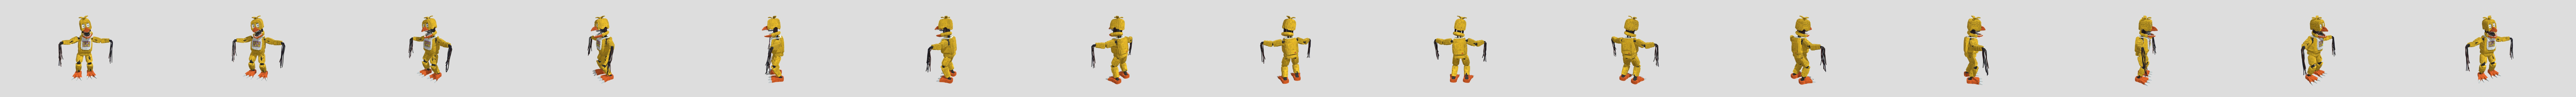 Withered Chica Port Dany Fox FNaF 2 - Download Free 3D model by